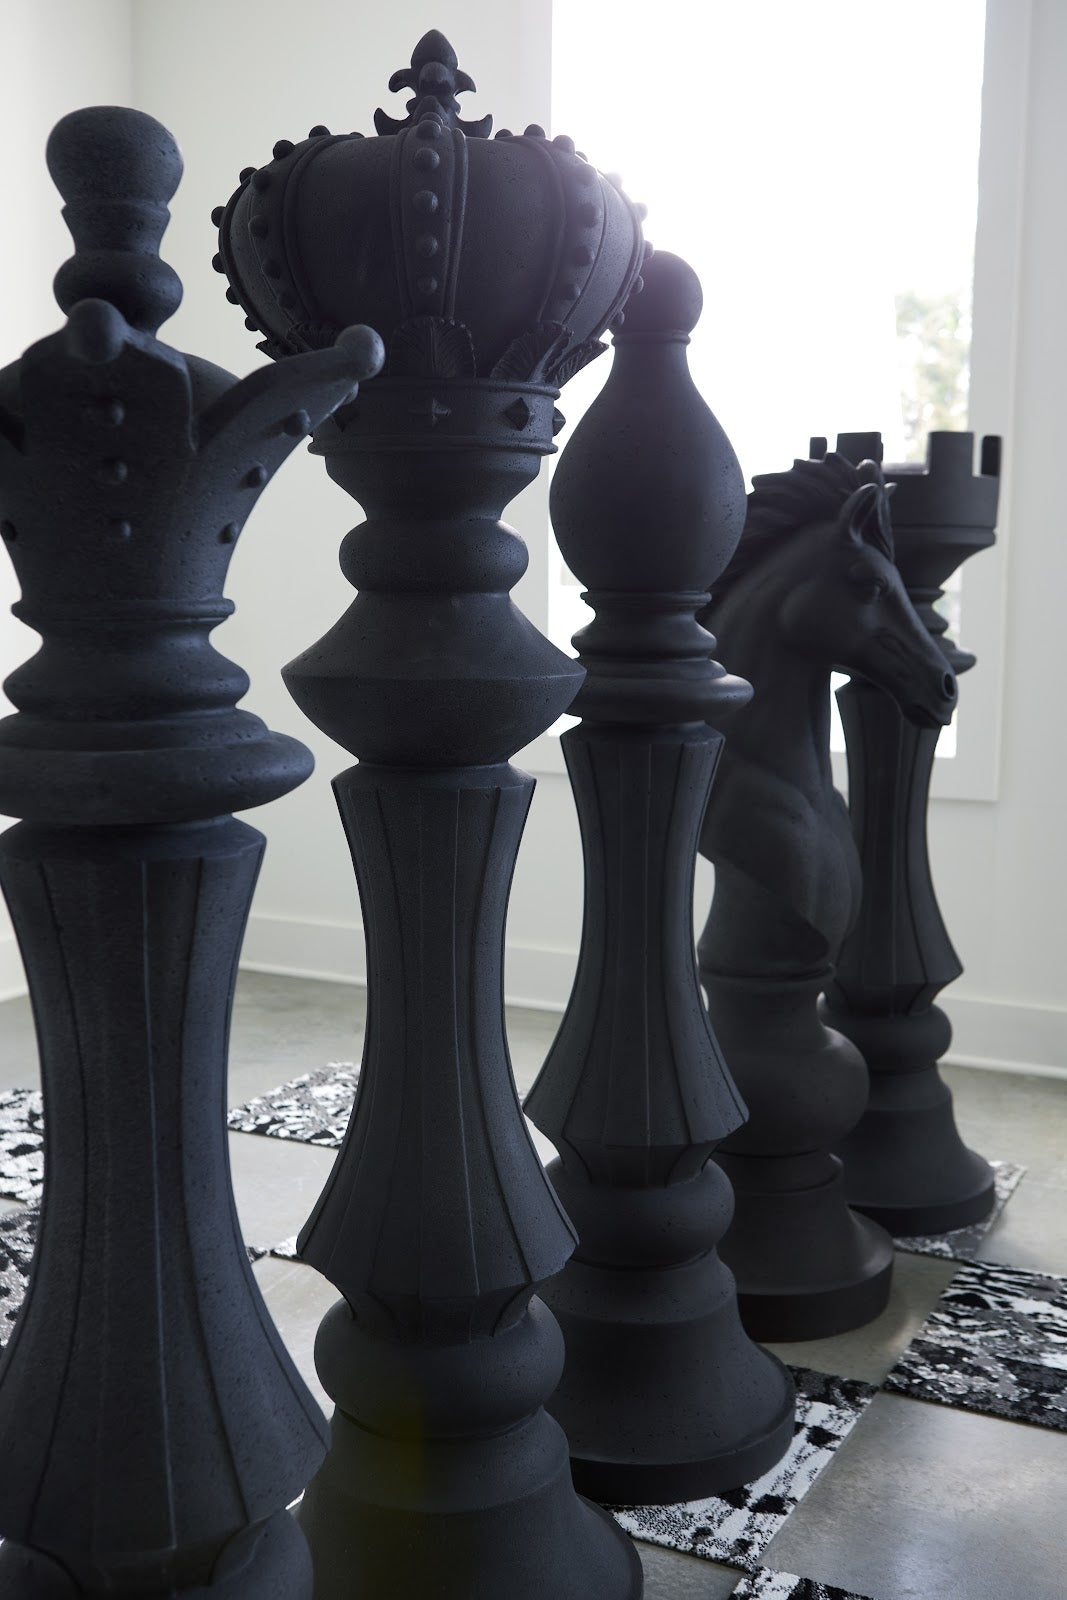 Chess Black Knight Cast Stone Sculpture (Indoor or Outdoor)